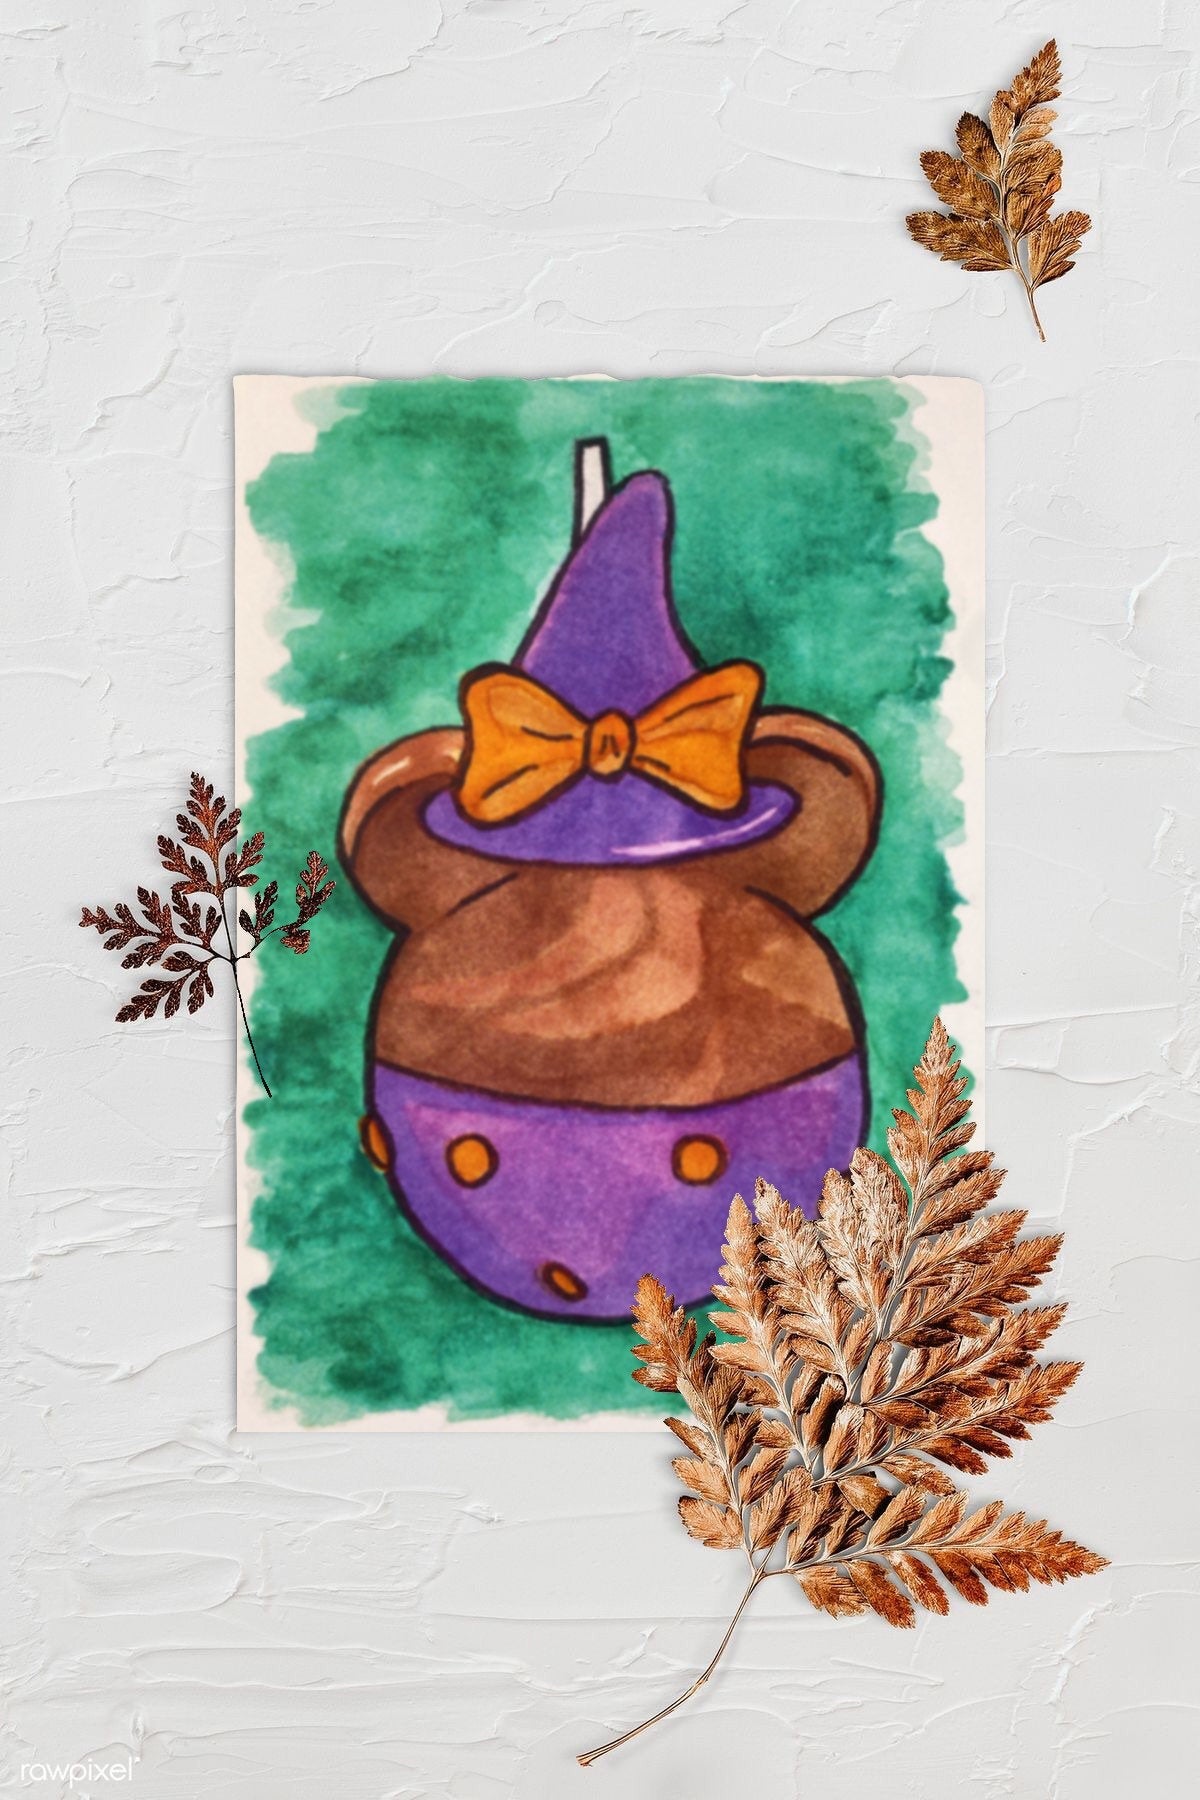 Witchy Mouse Halloween Costume Dessert Food Illustration - The Happiest Caramel Apples on Earth.